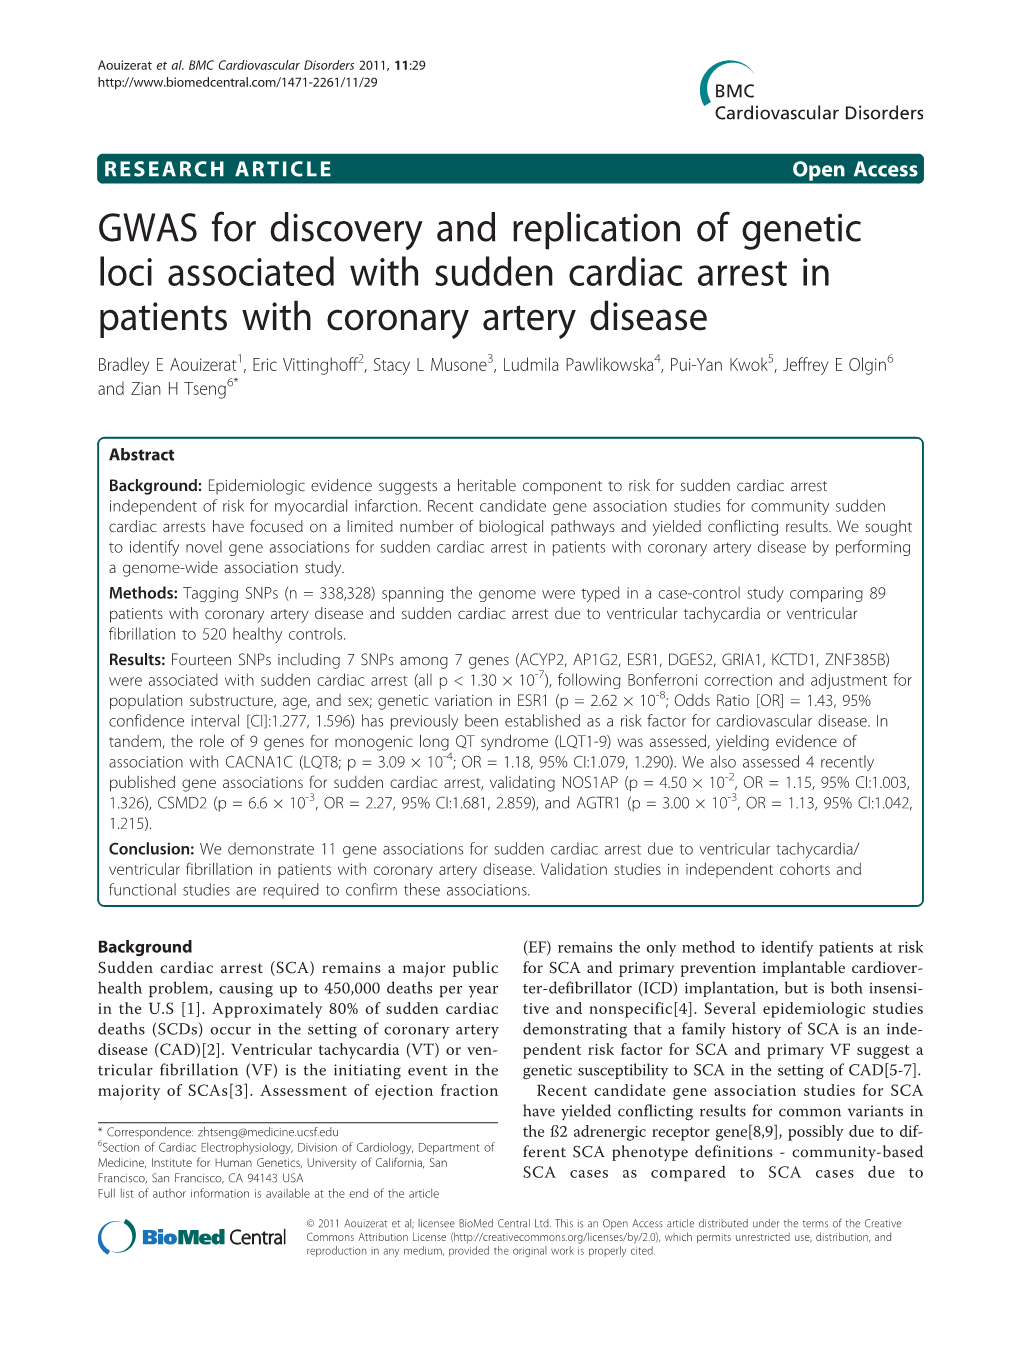 GWAS for Discovery and Replication of Genetic Loci